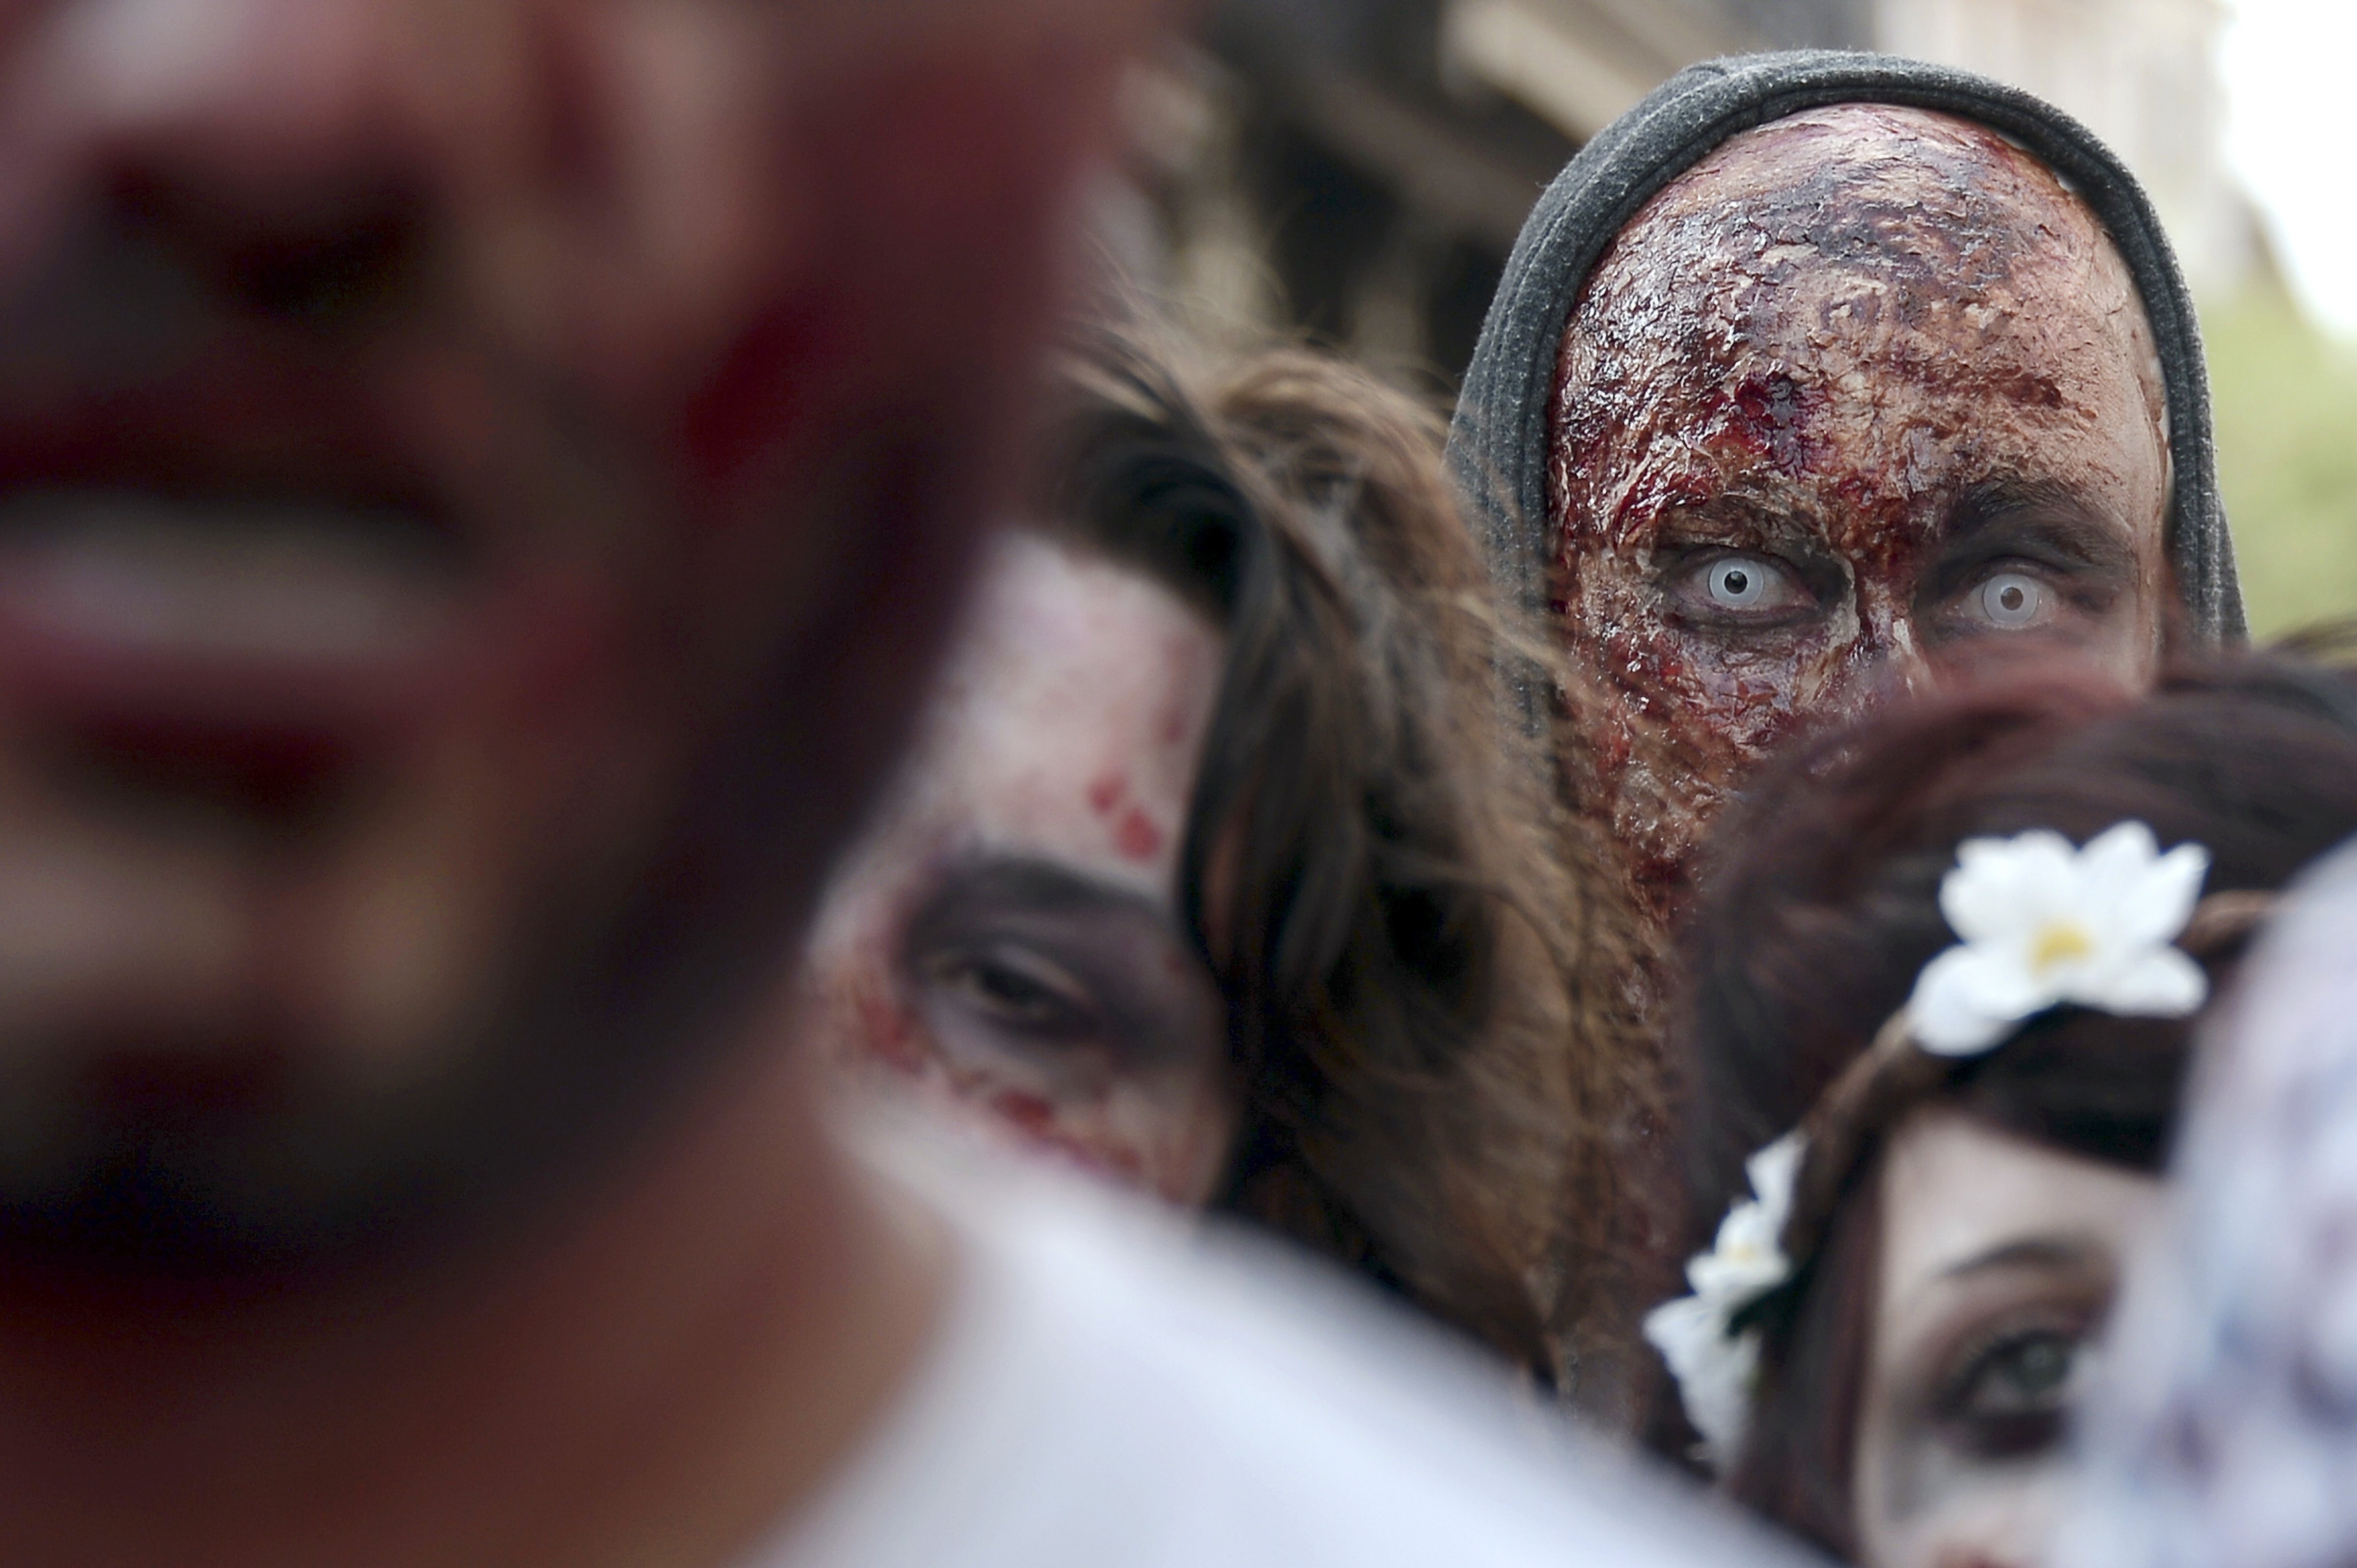 People dressed as zombies take part in the Zombie Walk event on Sept. 13, 2014, in the eastern French city of Strasbourg (Frederick Florin—AFP/Getty)